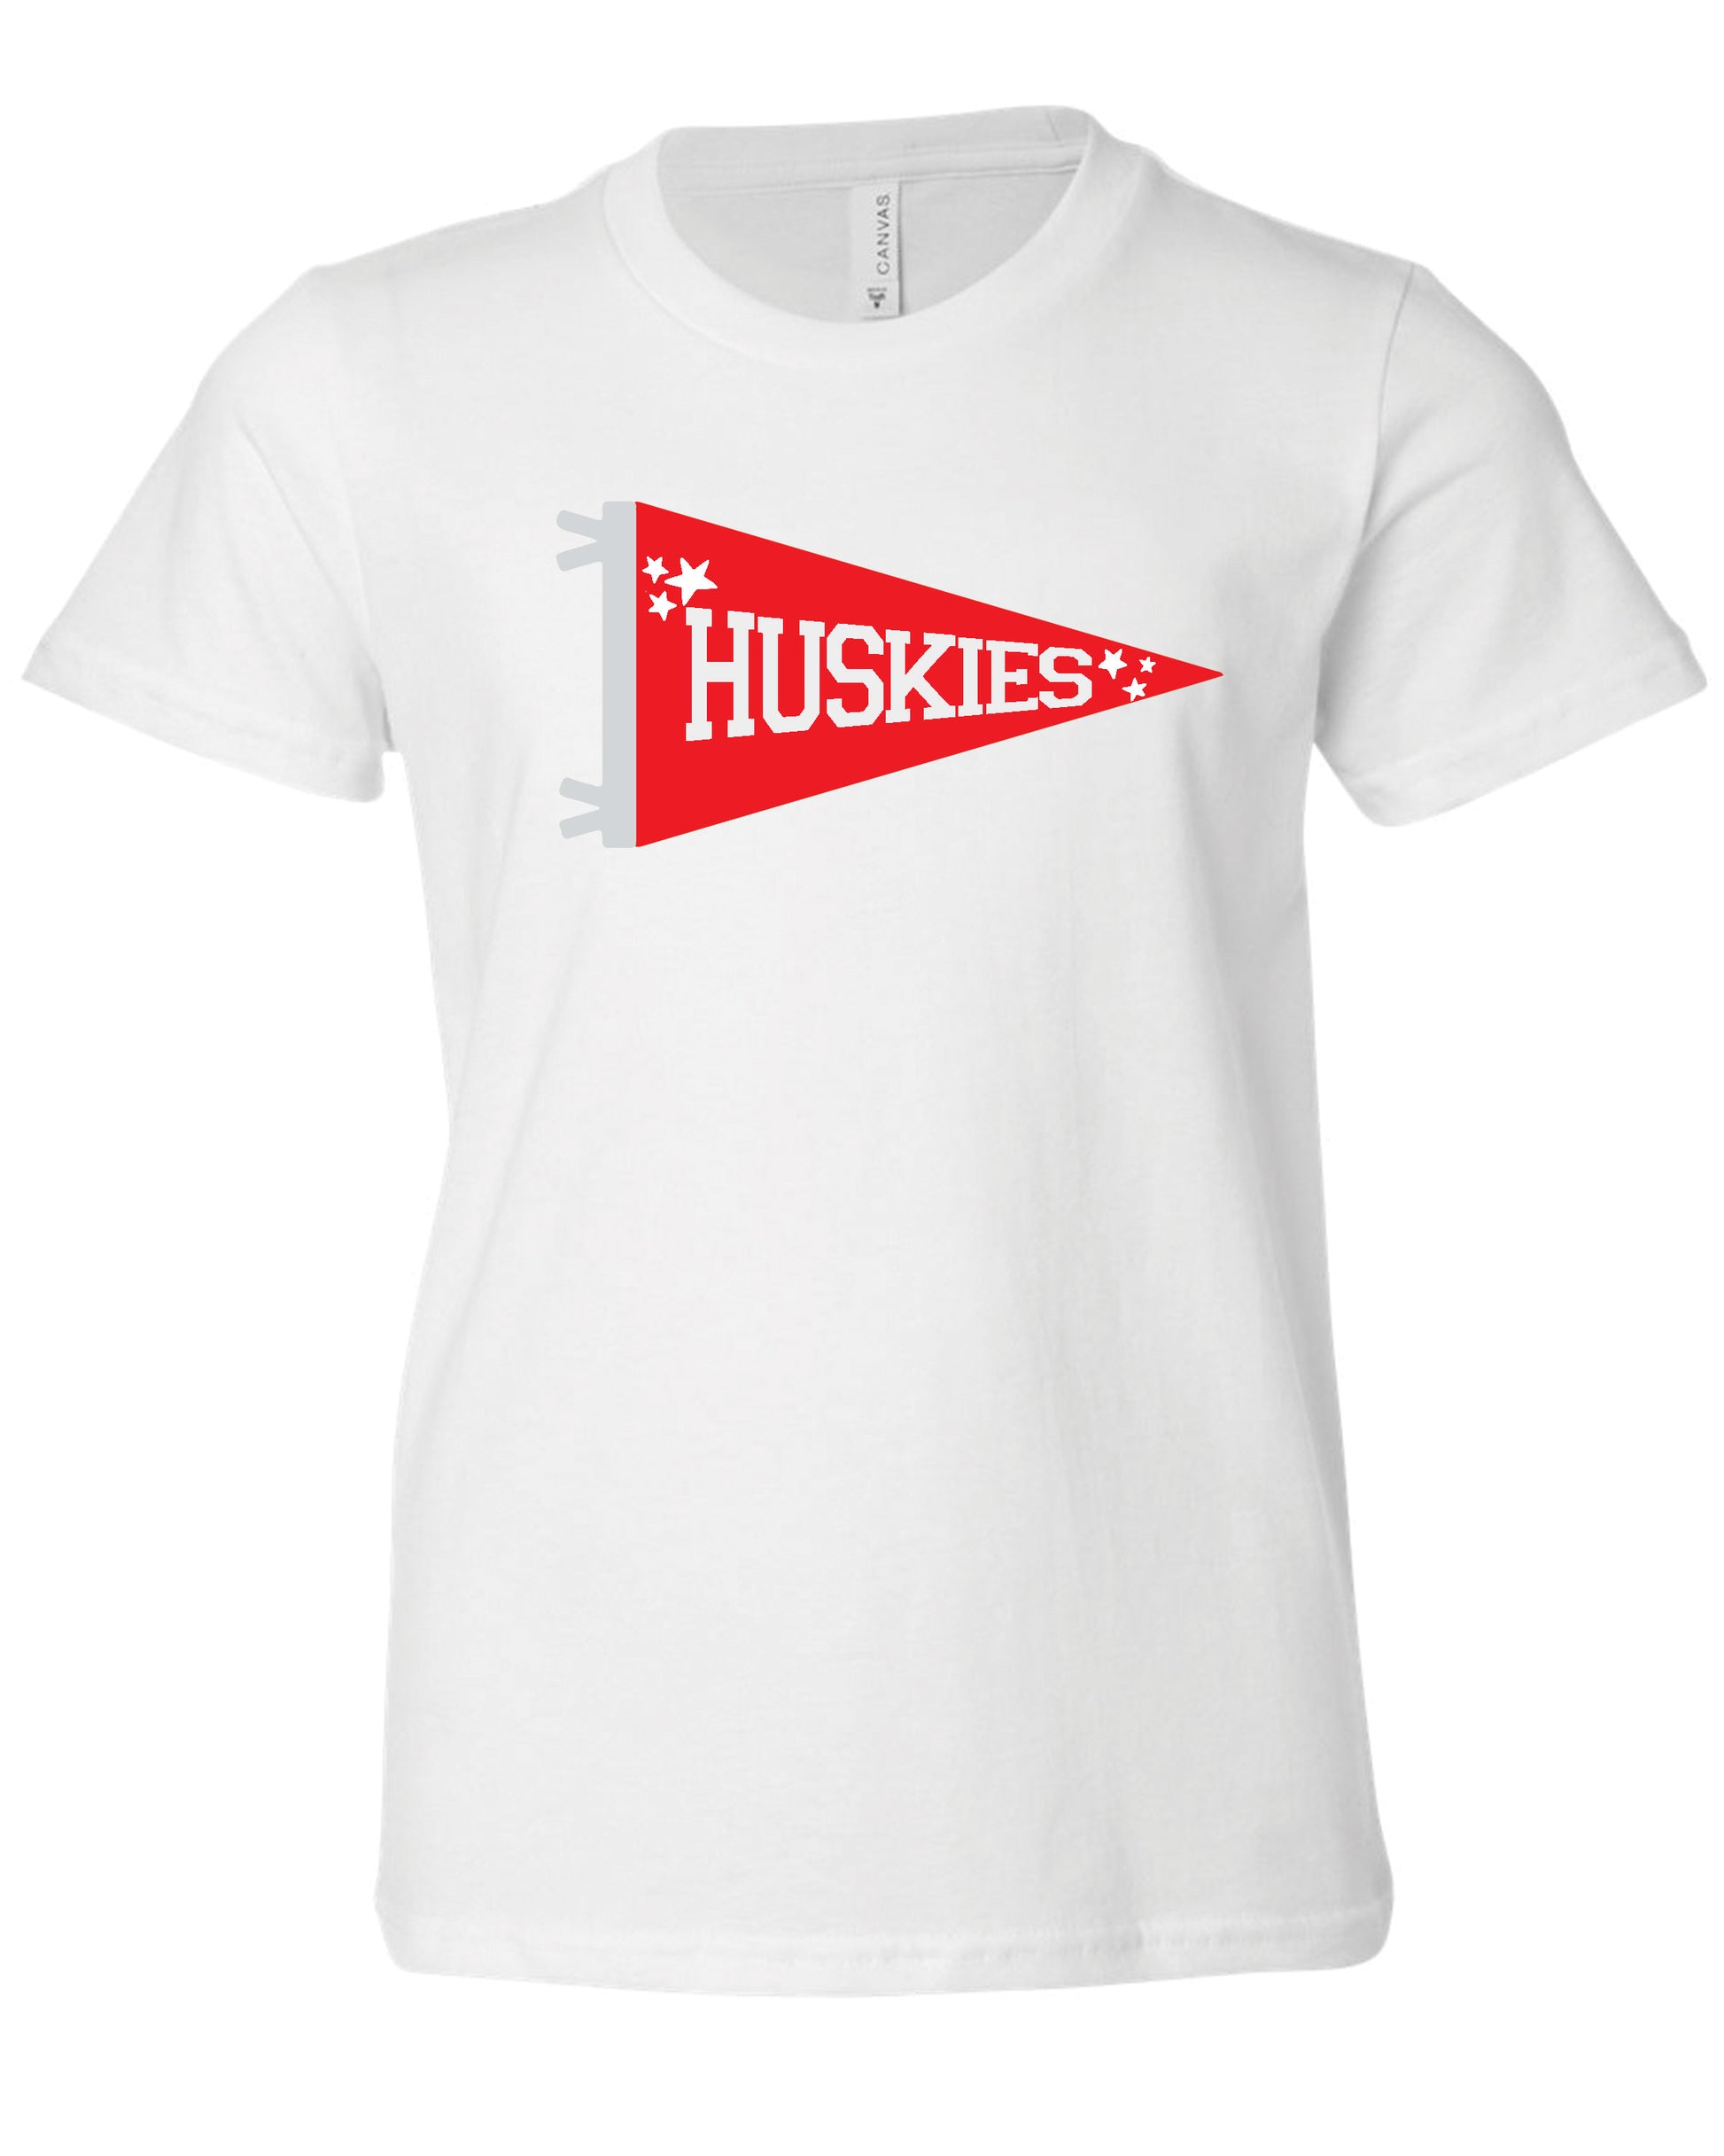 Huskies Gameday Pennant | Kids Tee-Sister Shirts-Sister Shirts, Cute & Custom Tees for Mama & Littles in Trussville, Alabama.